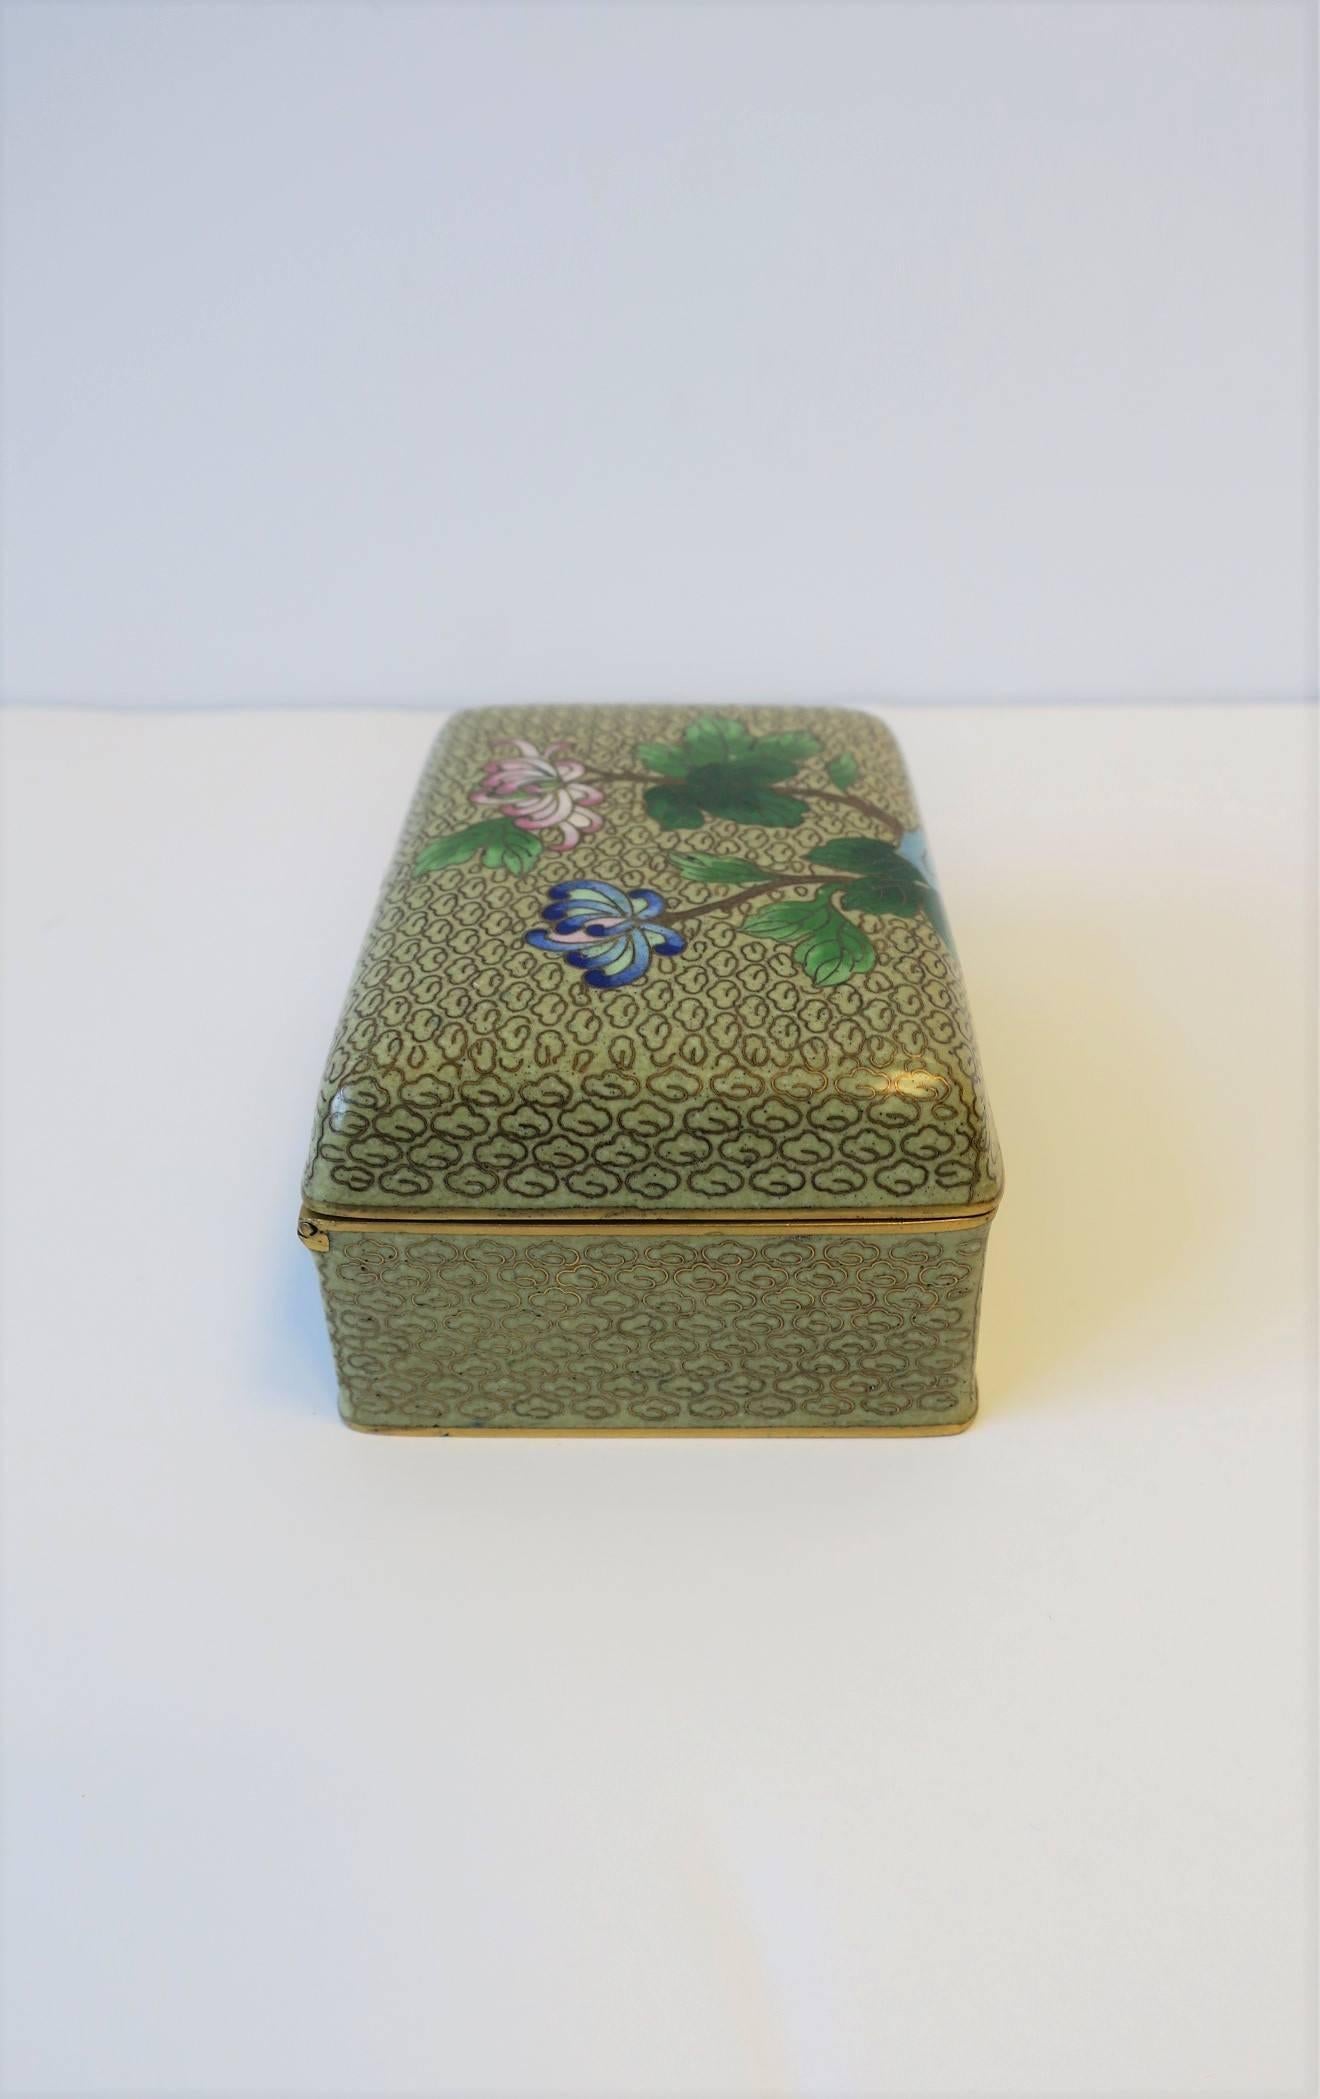 20th Century Chinese Cloisonné Enamel and Brass Jewelry Box